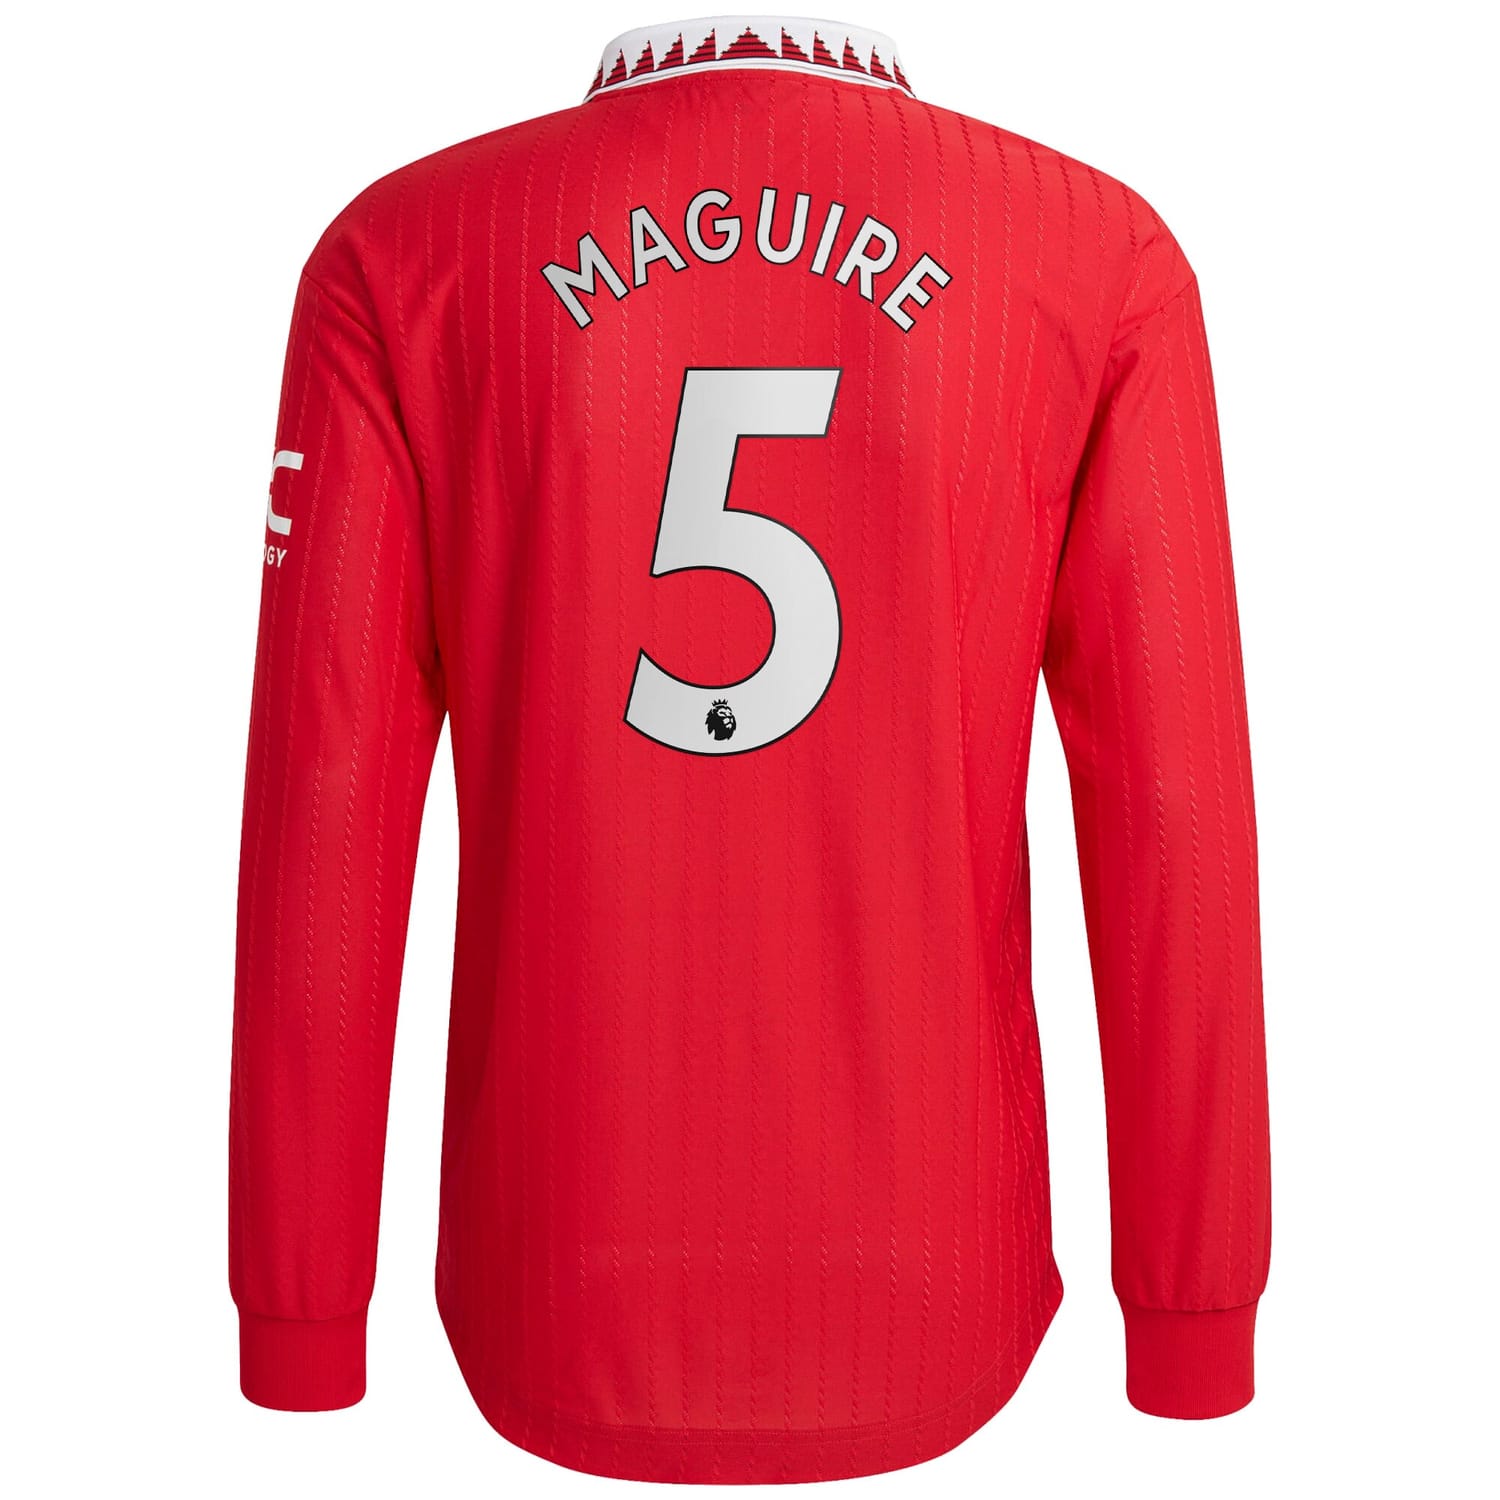 Premier League Manchester United Home Authentic Jersey Shirt Long Sleeve 2022-23 player Harry Maguire 5 printing for Men